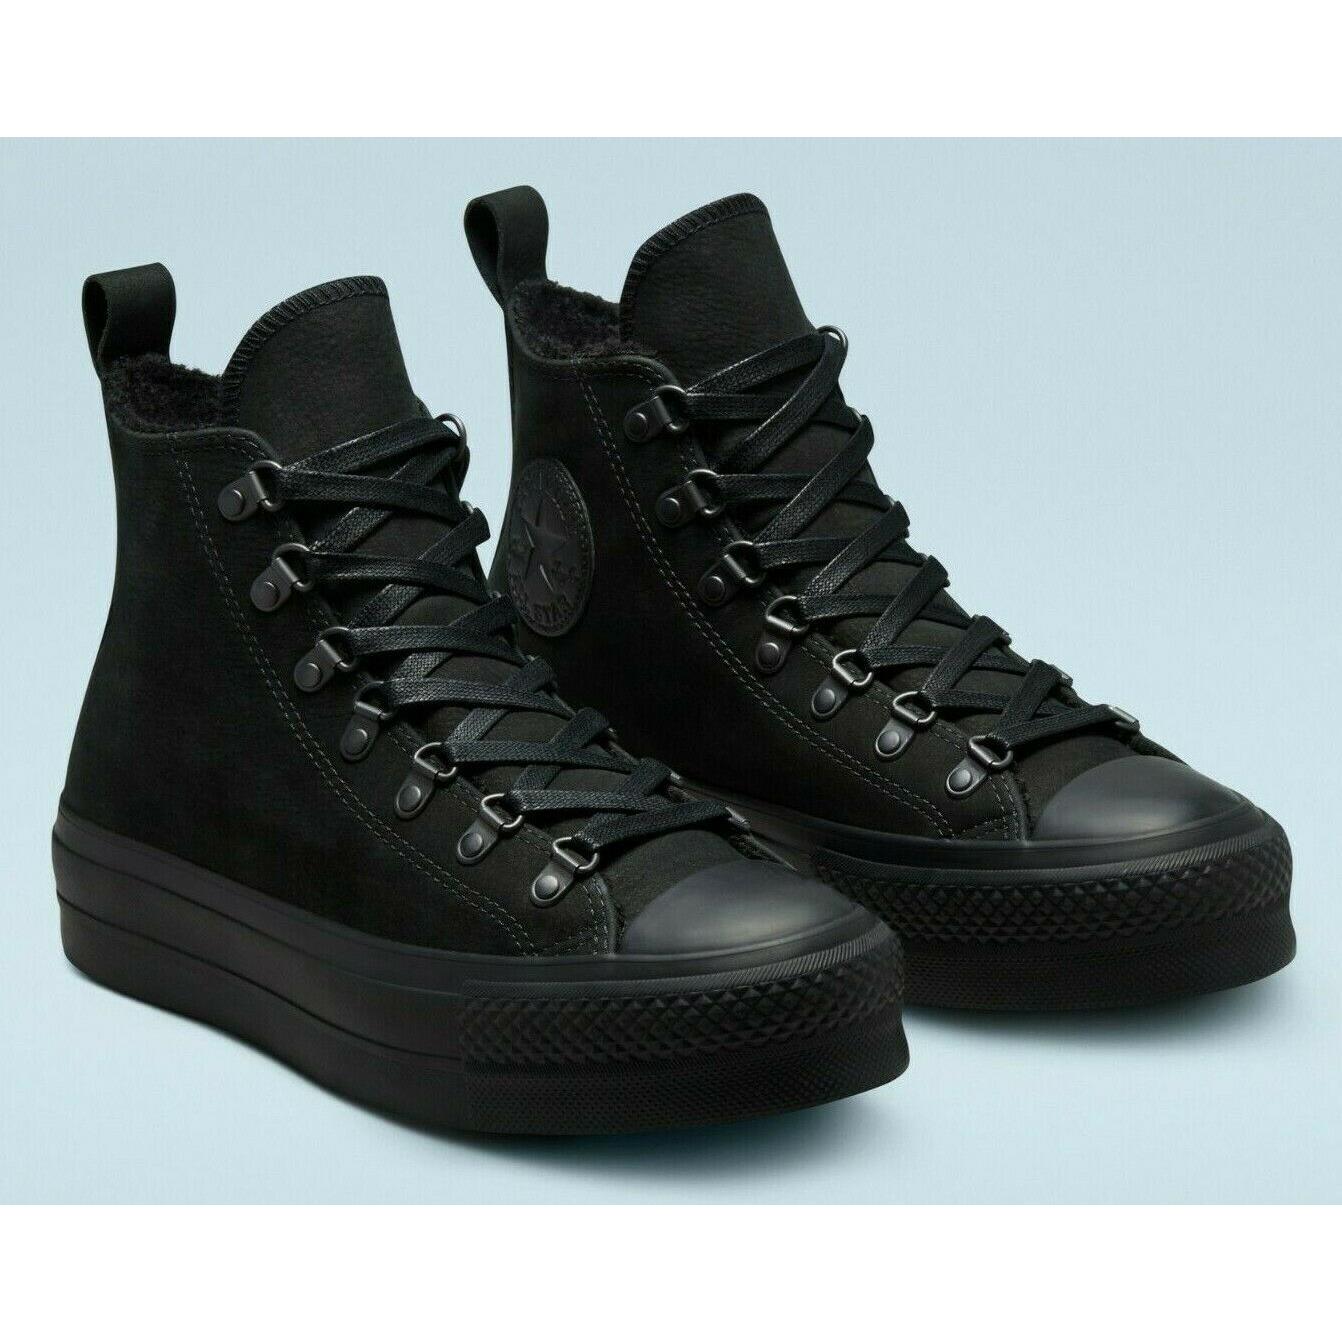 Converse shoes All Star Chuck Taylor - Black 8